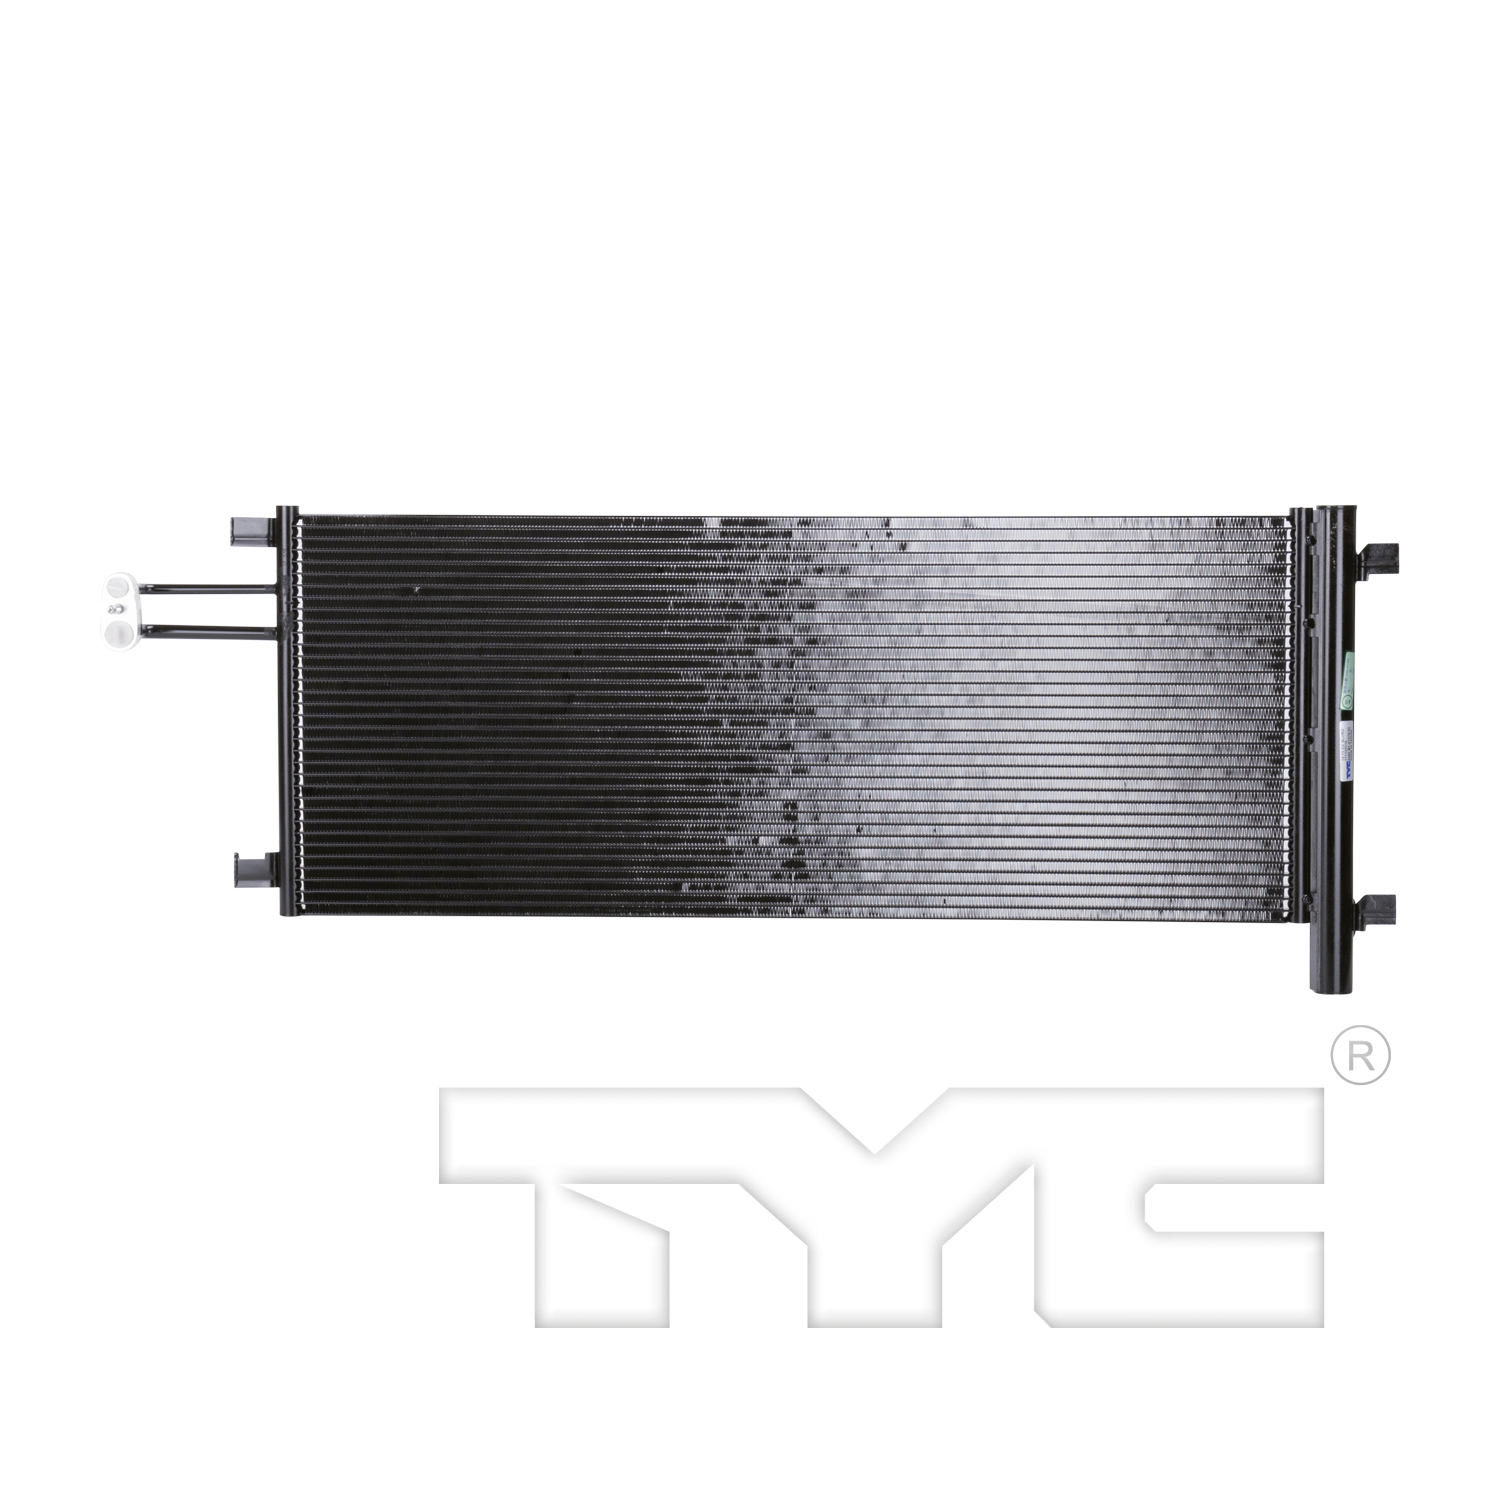 Aftermarket AC CONDENSERS for GMC - SIERRA 1500 LIMITED, SIERRA 1500 LIMITED,19-19,Air conditioning condenser